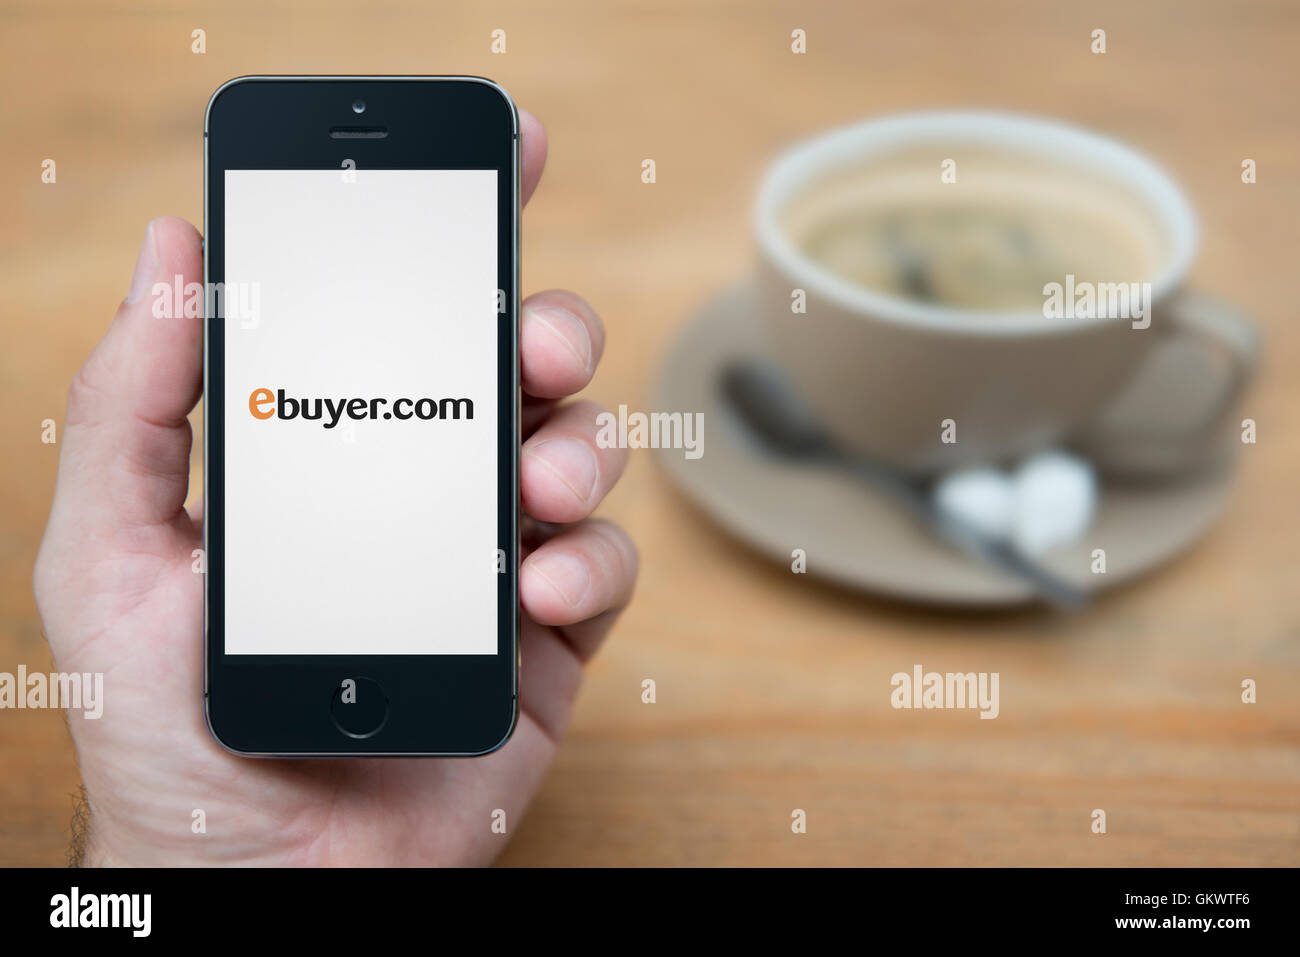 A man looks at his iPhone which displays the ebuyer logo, while sat with a cup of coffee (Editorial use only). Stock Photo